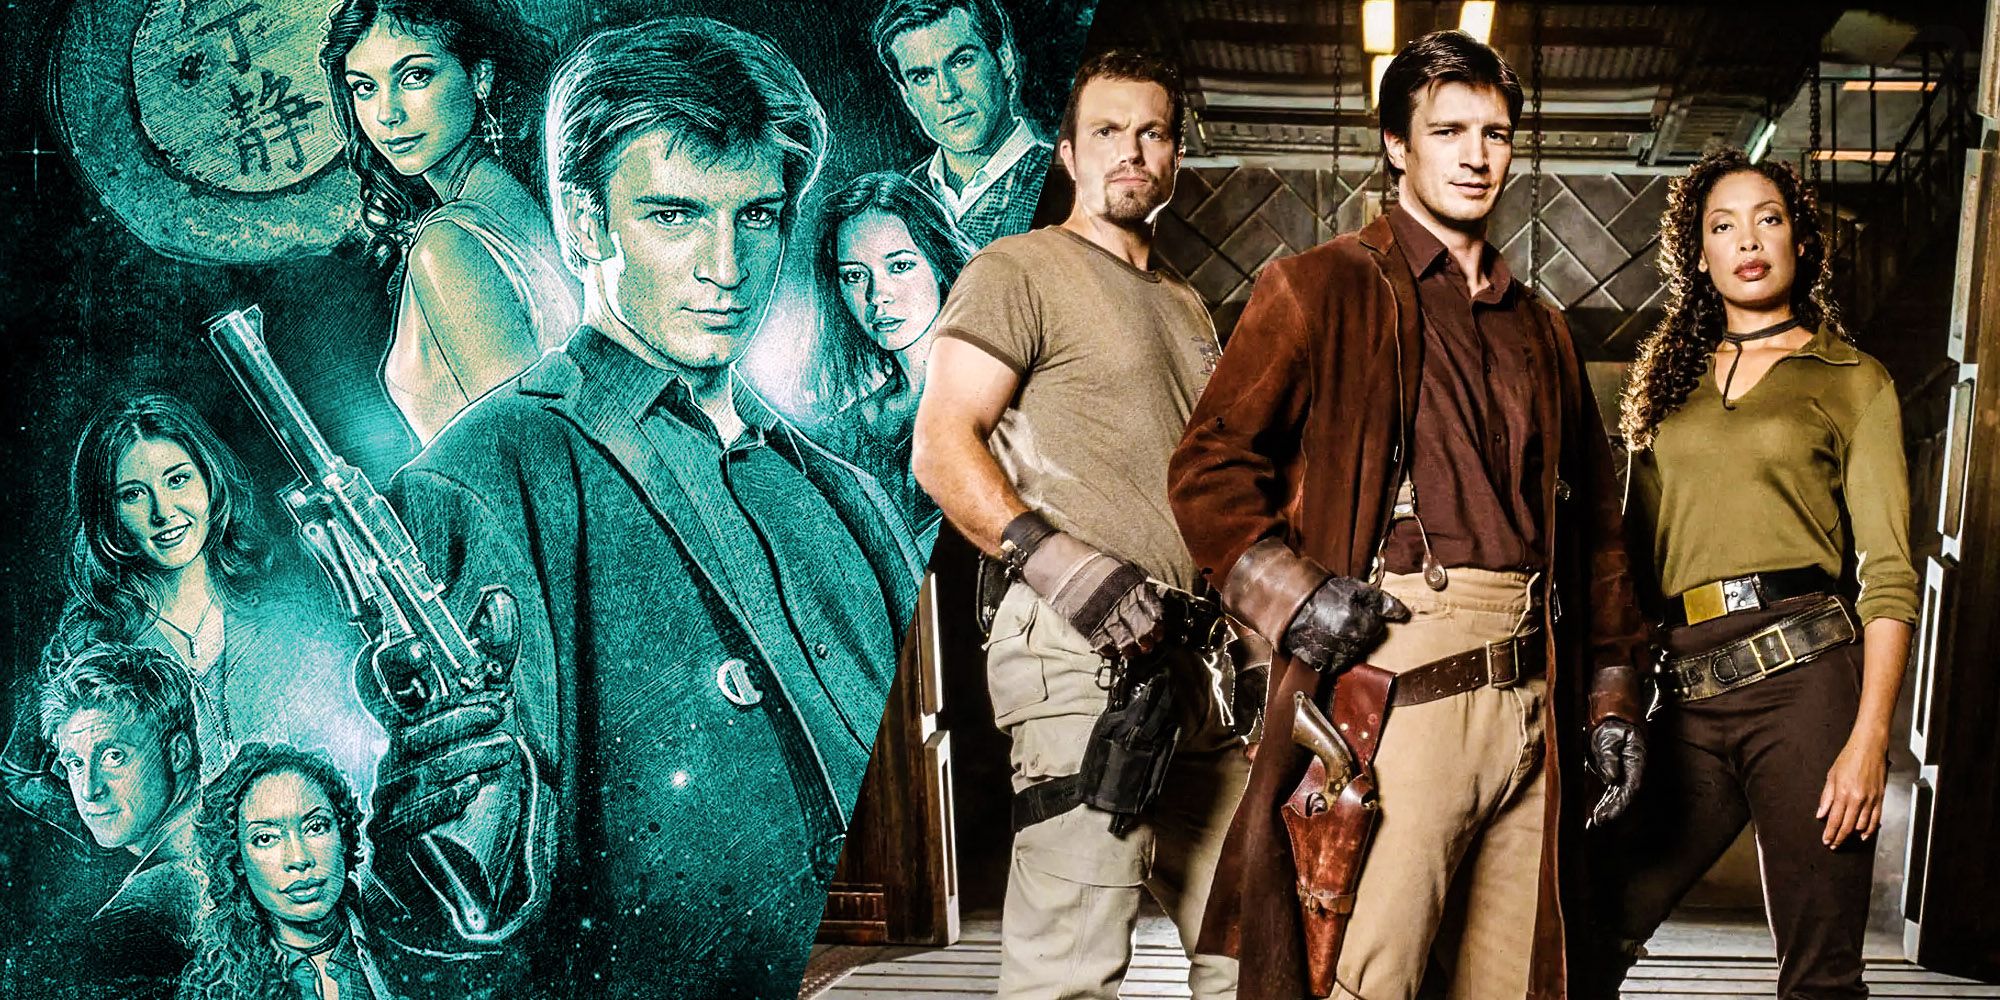 A Modern Firefly Reboot Could Work